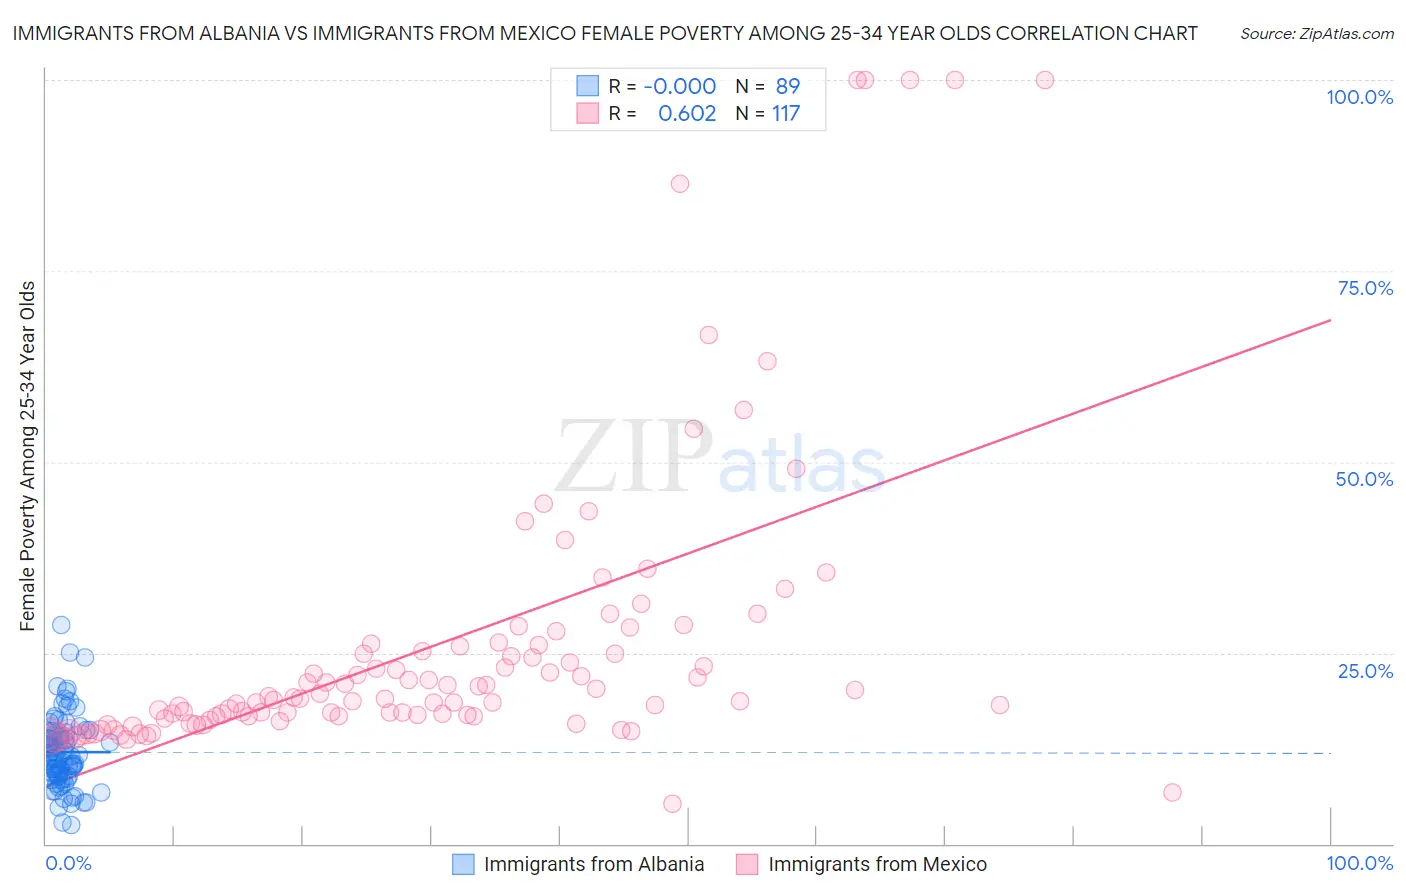 Immigrants from Albania vs Immigrants from Mexico Female Poverty Among 25-34 Year Olds